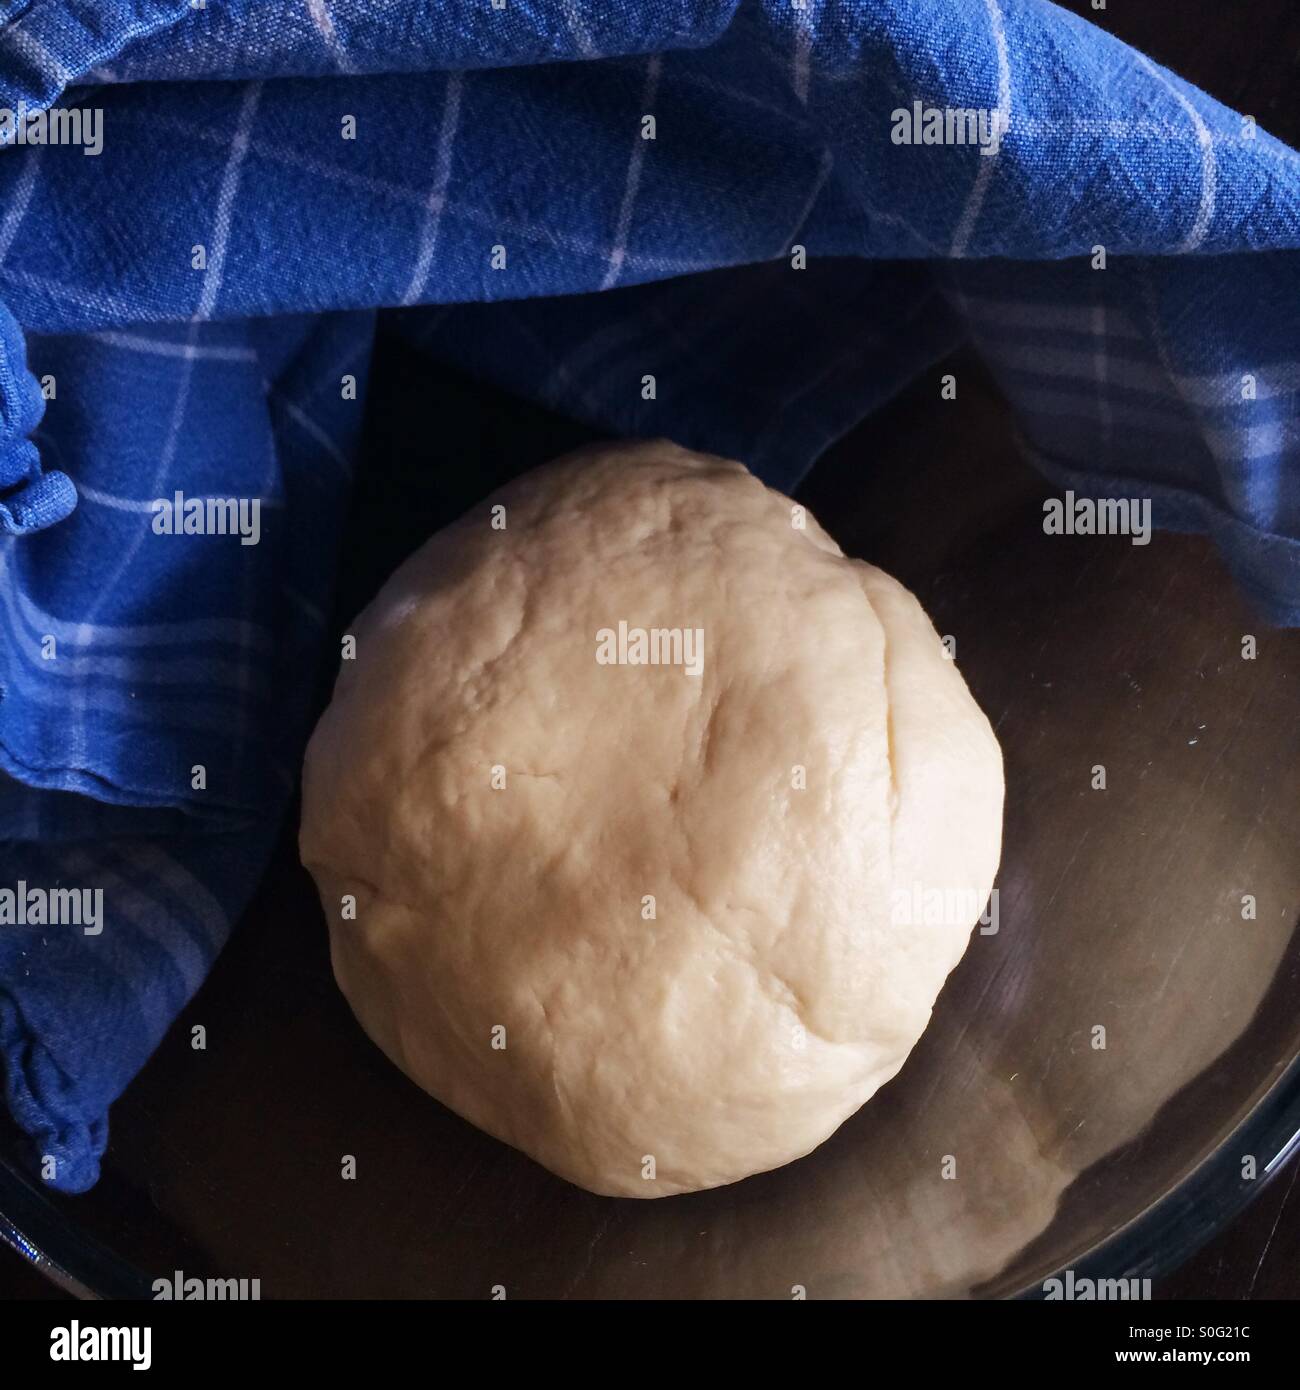 Bread dough proofing in glass bowl with blue kitchen towel Stock Photo